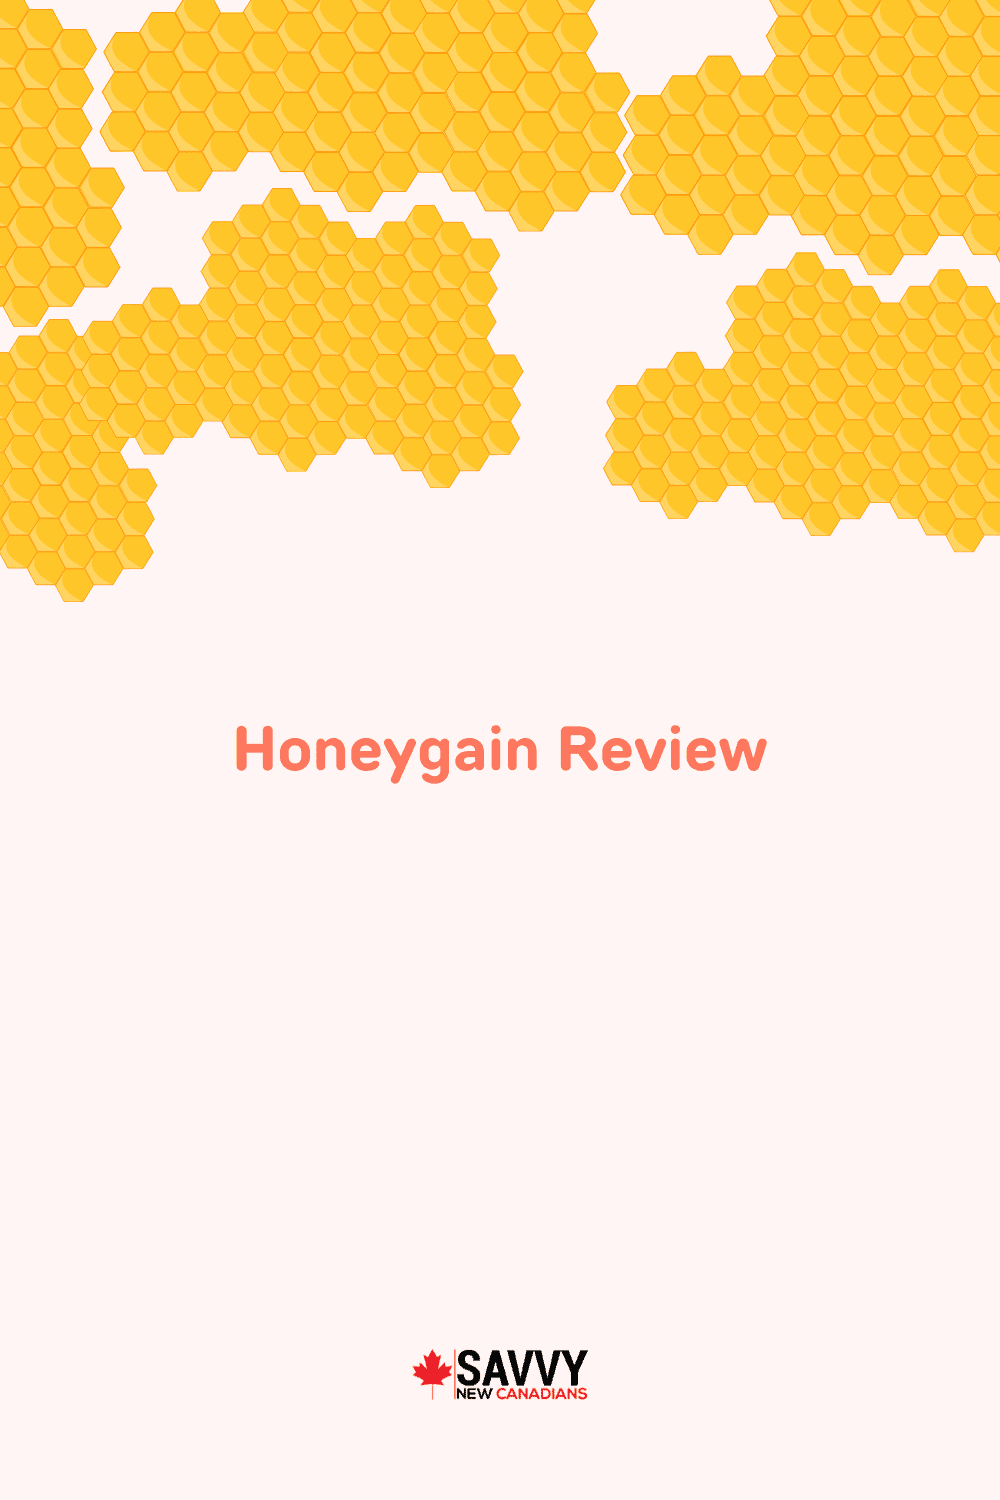 Honeygain Review 2022: Is it Legit and Safe?